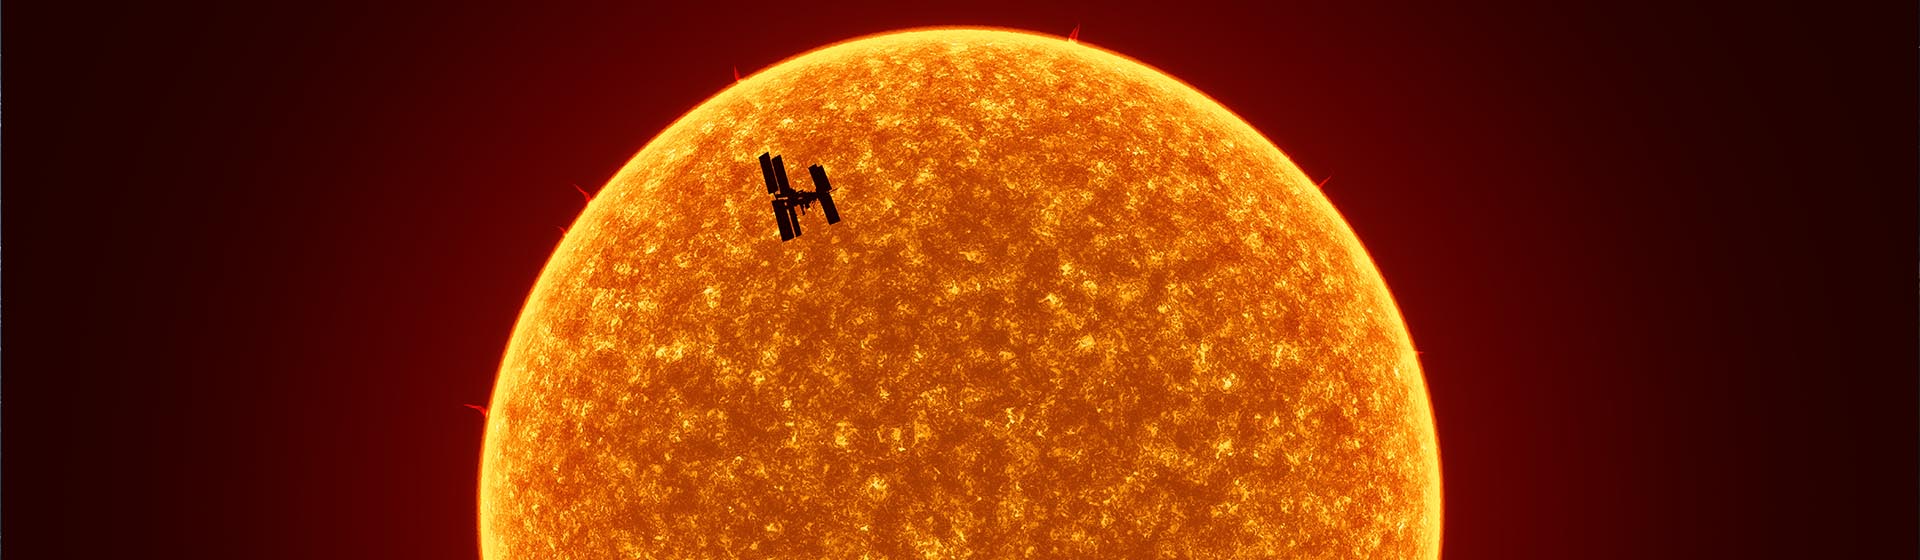 image of sun and satellite